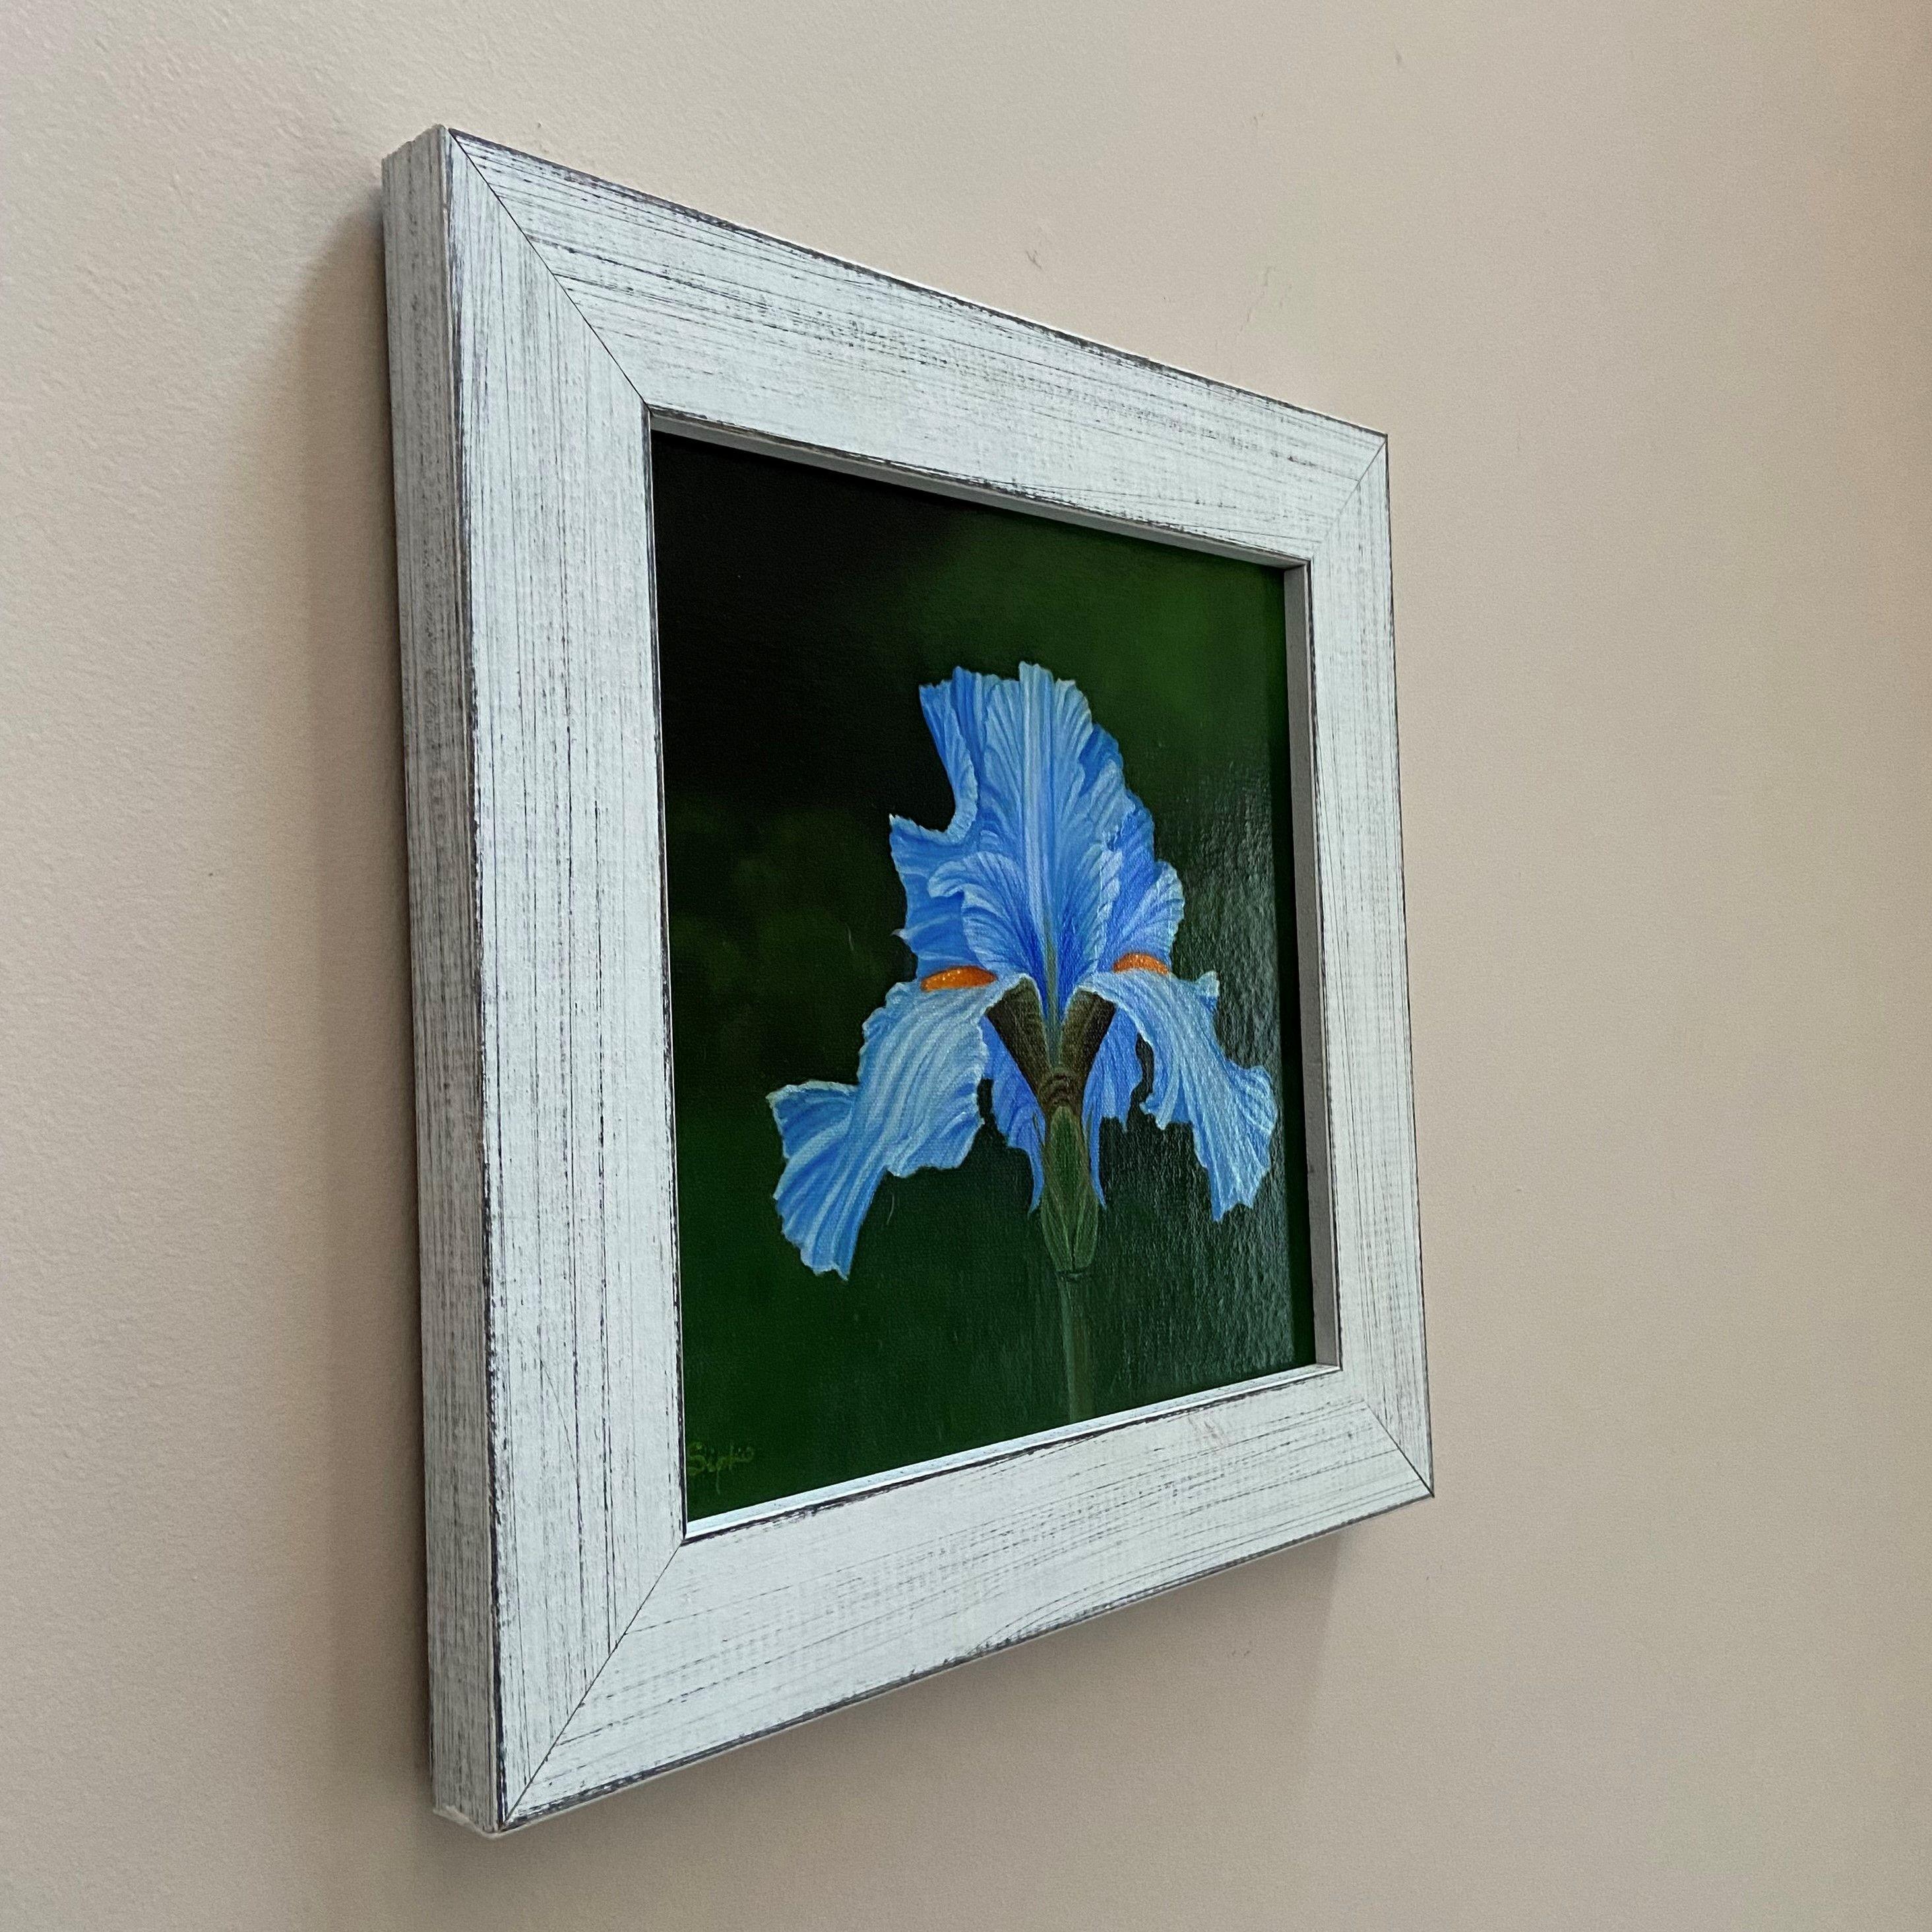 This is a Bearded Iris done in dramatic garden light. The piece is 8 x 8 on a linen panel. This piece is framed in a distressed barn-wood style frame and has been varnished and is now ready to hang in your home or place of business. It has a nice